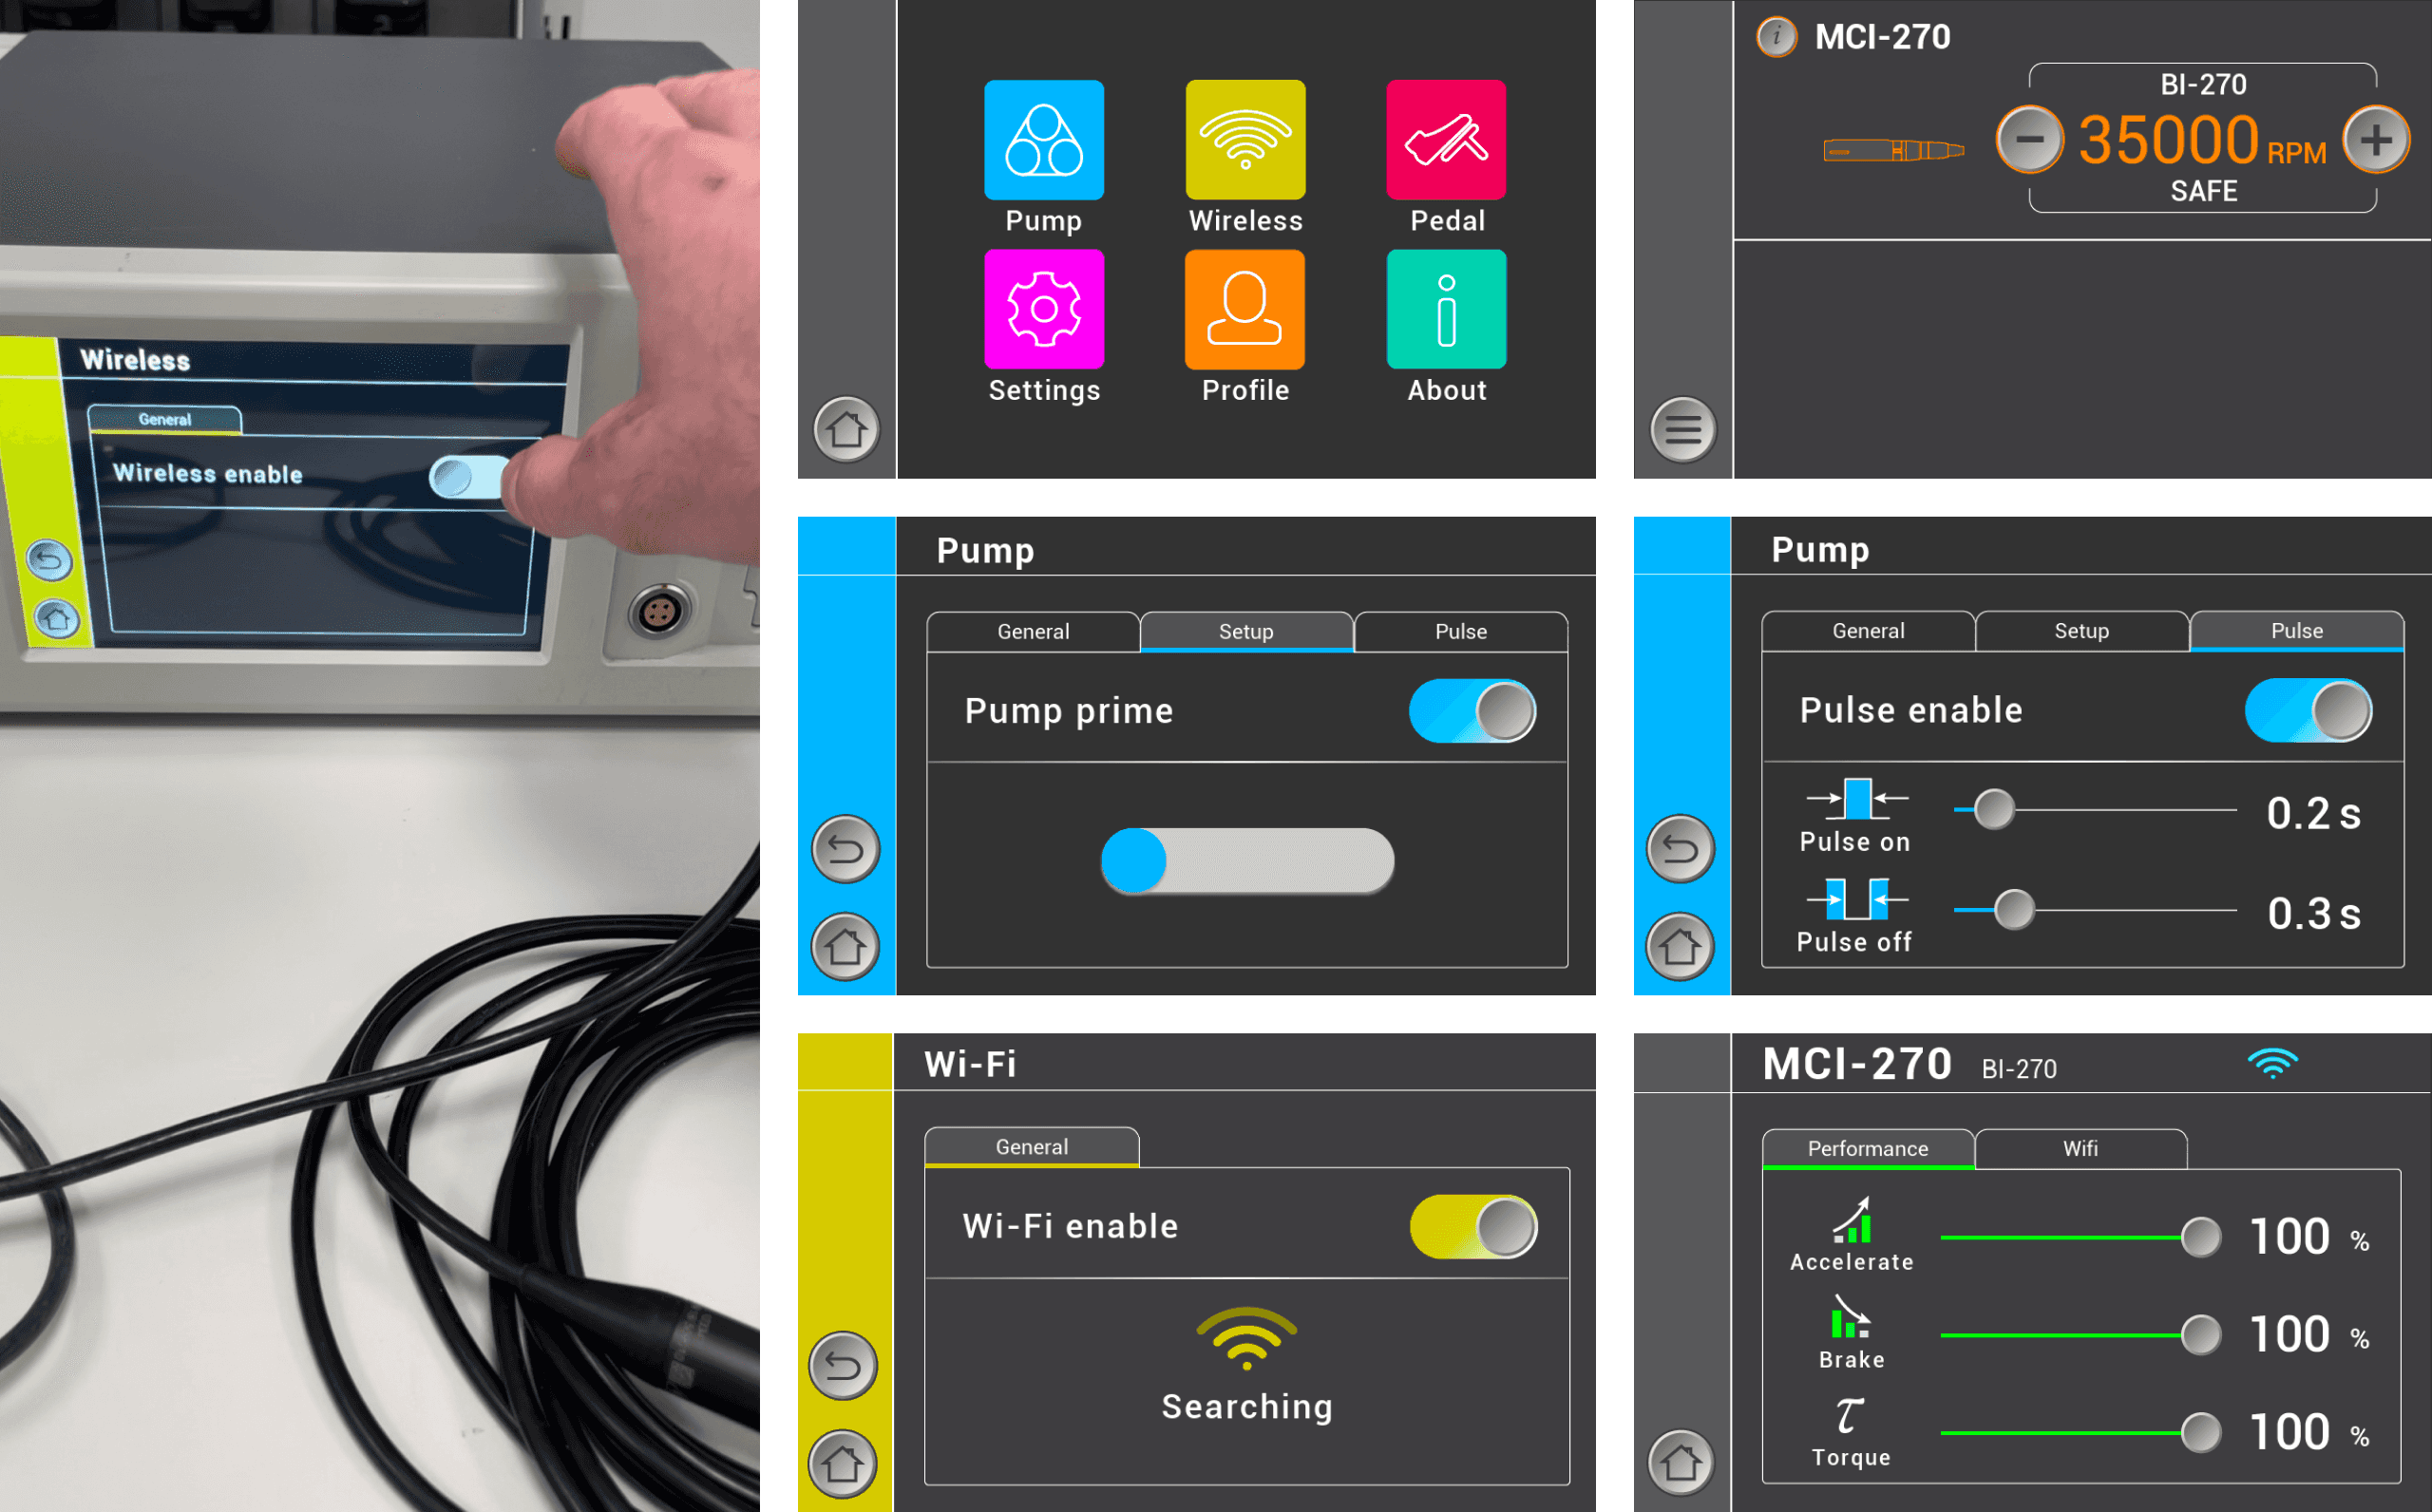 UI of medical device developed by engineers